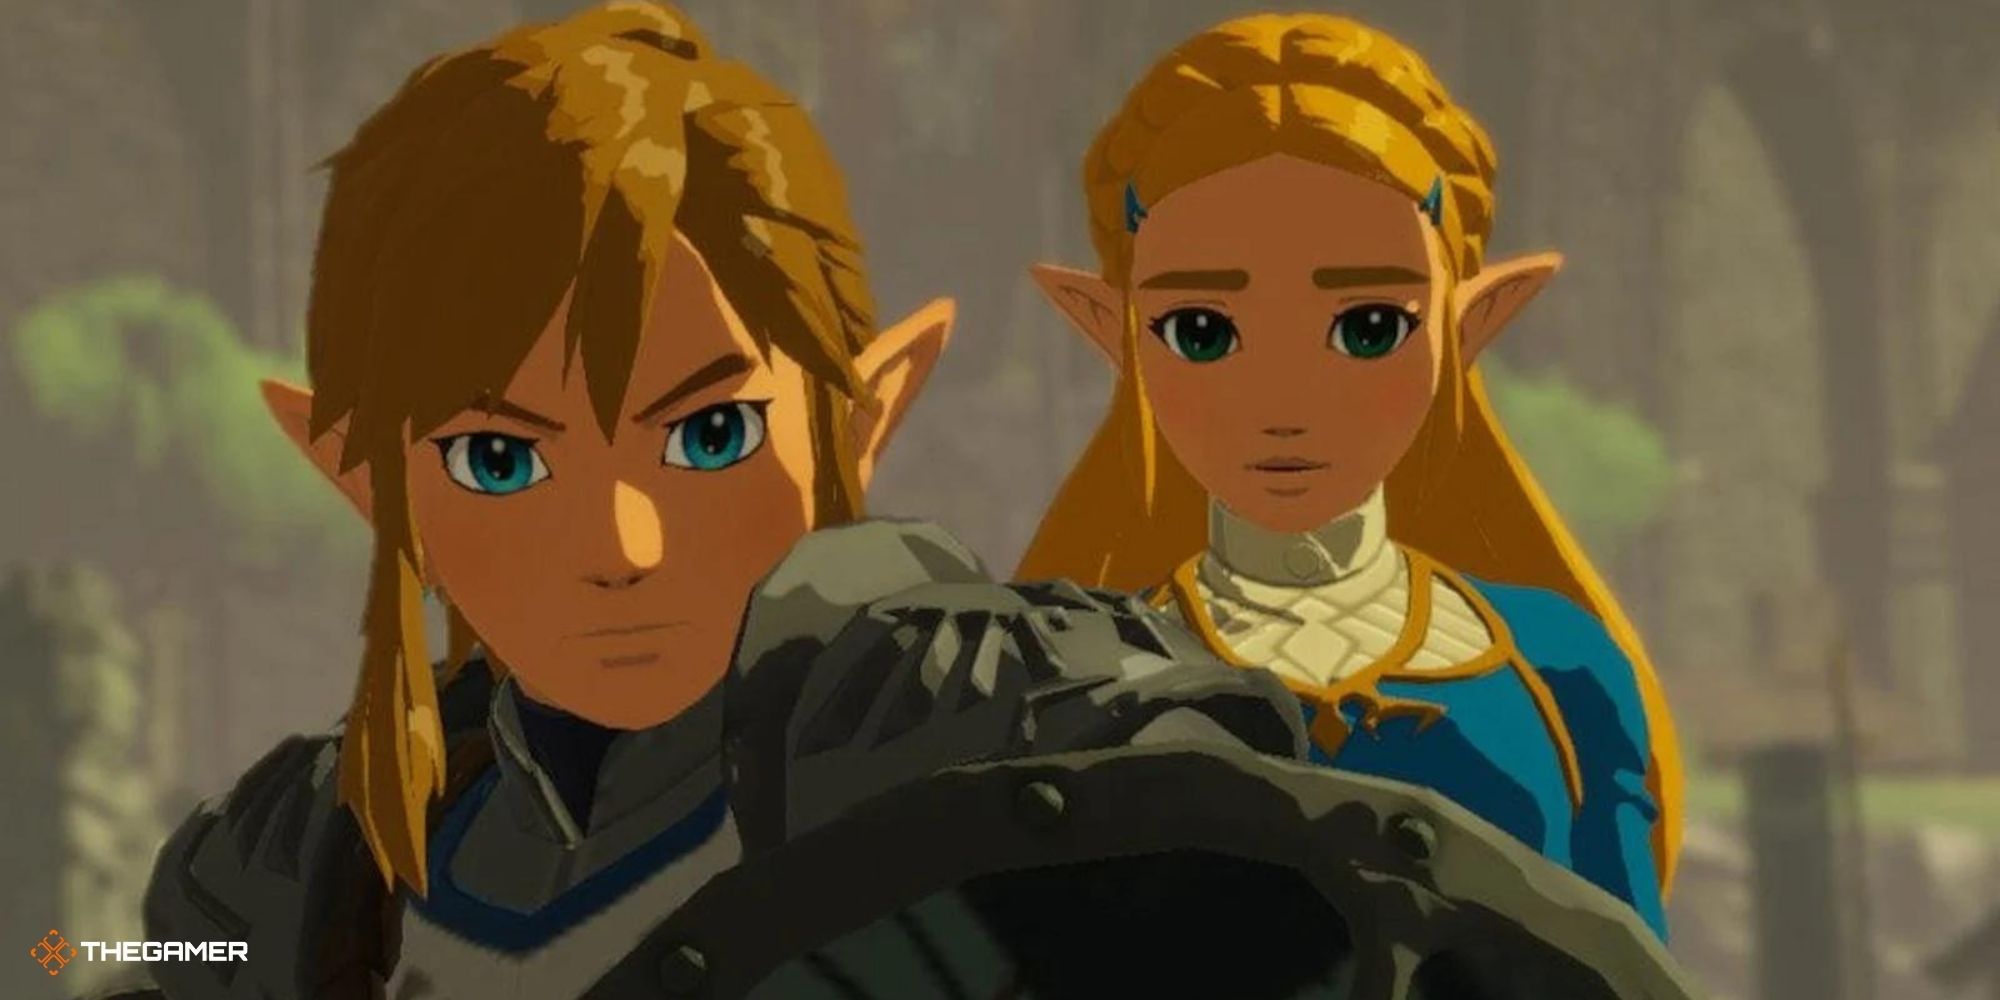 Breath of the Wild - Link standing in front of Zelda with a shield